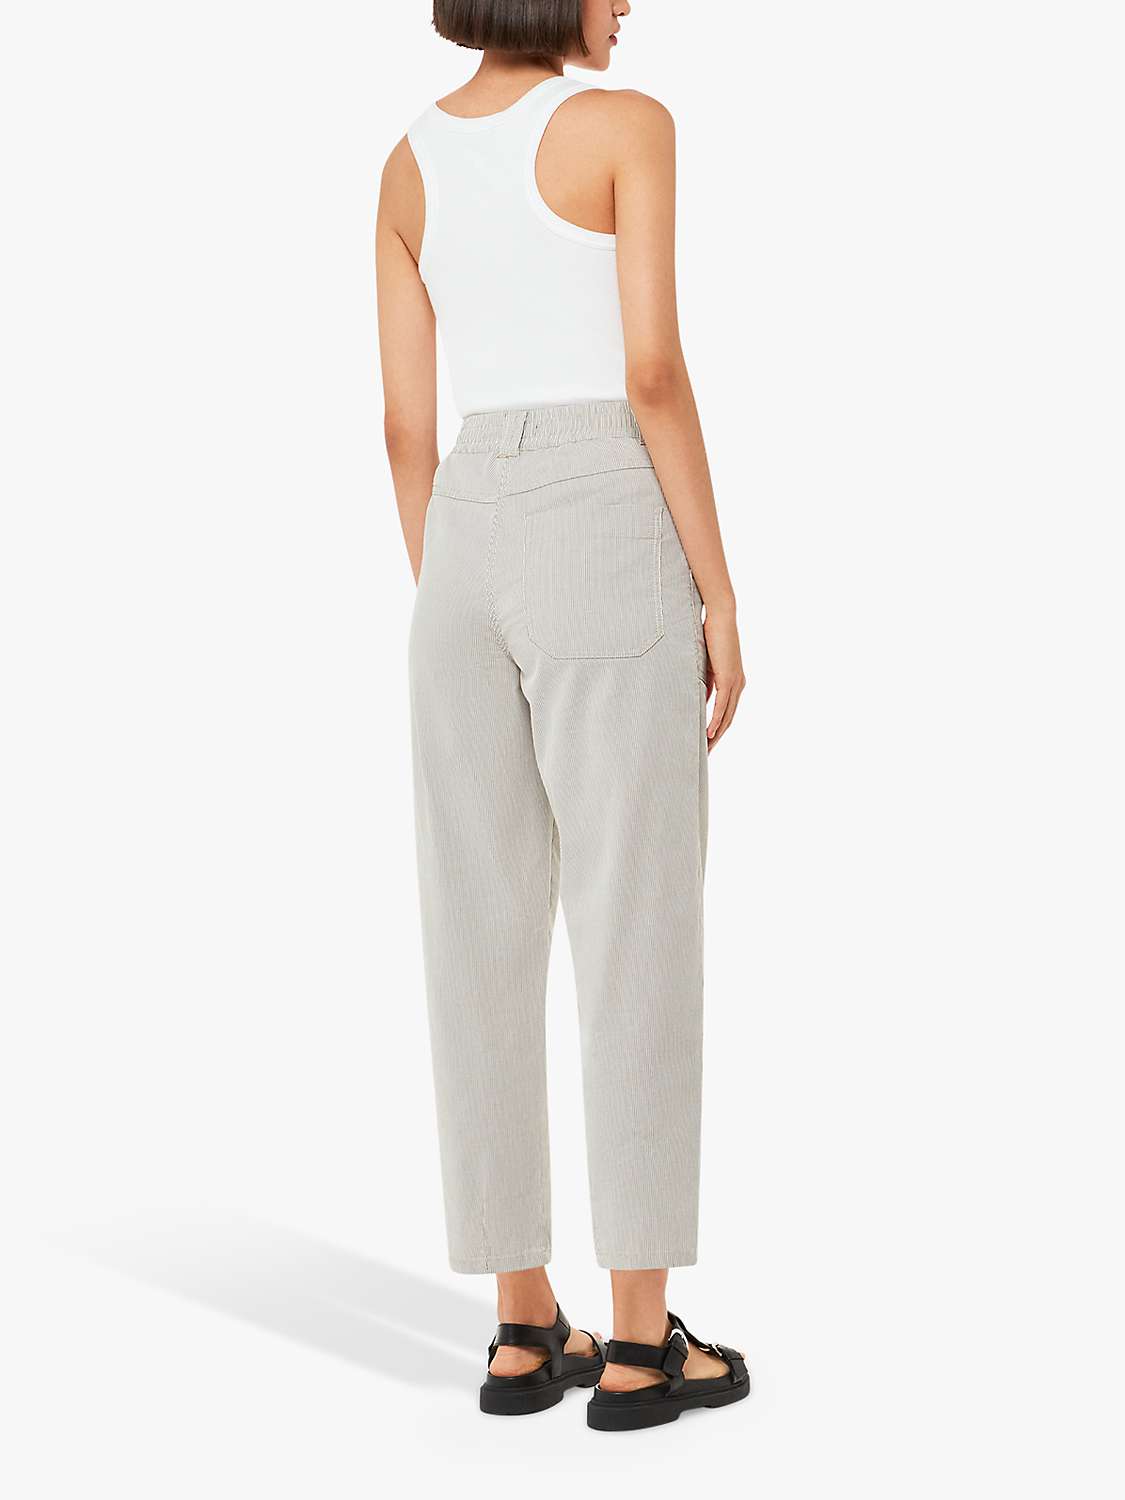 Whistles Tessa Stripe Casual Trousers, Grey at John Lewis & Partners